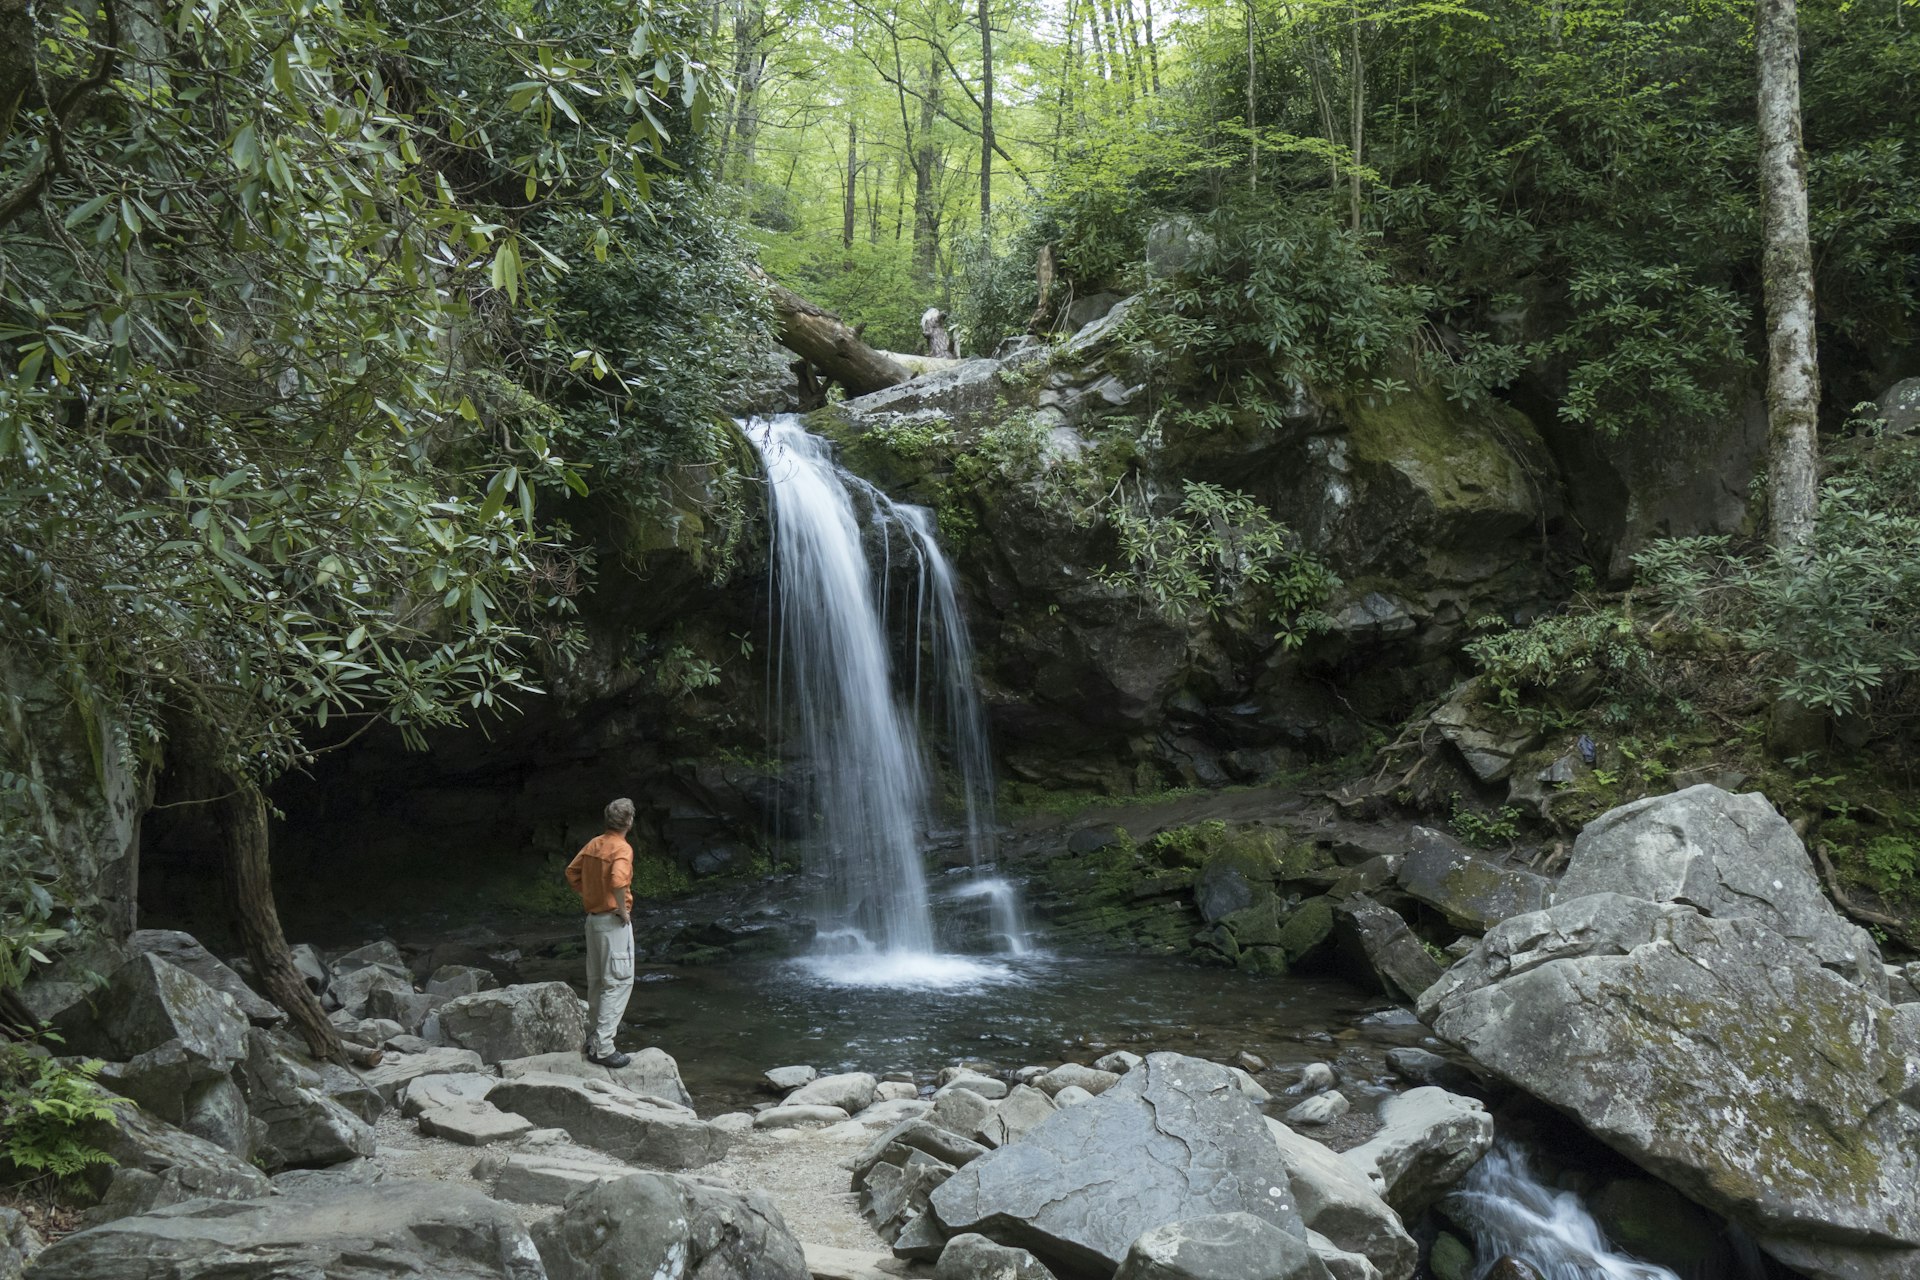 A hiker explores the Roaring Fork River and Grotto Falls on the Trillium Gap Trail through the old growth hemlock forest and lush foliage on the steep hillsides of the Great Smoky Mountains National Park in Tennessee.